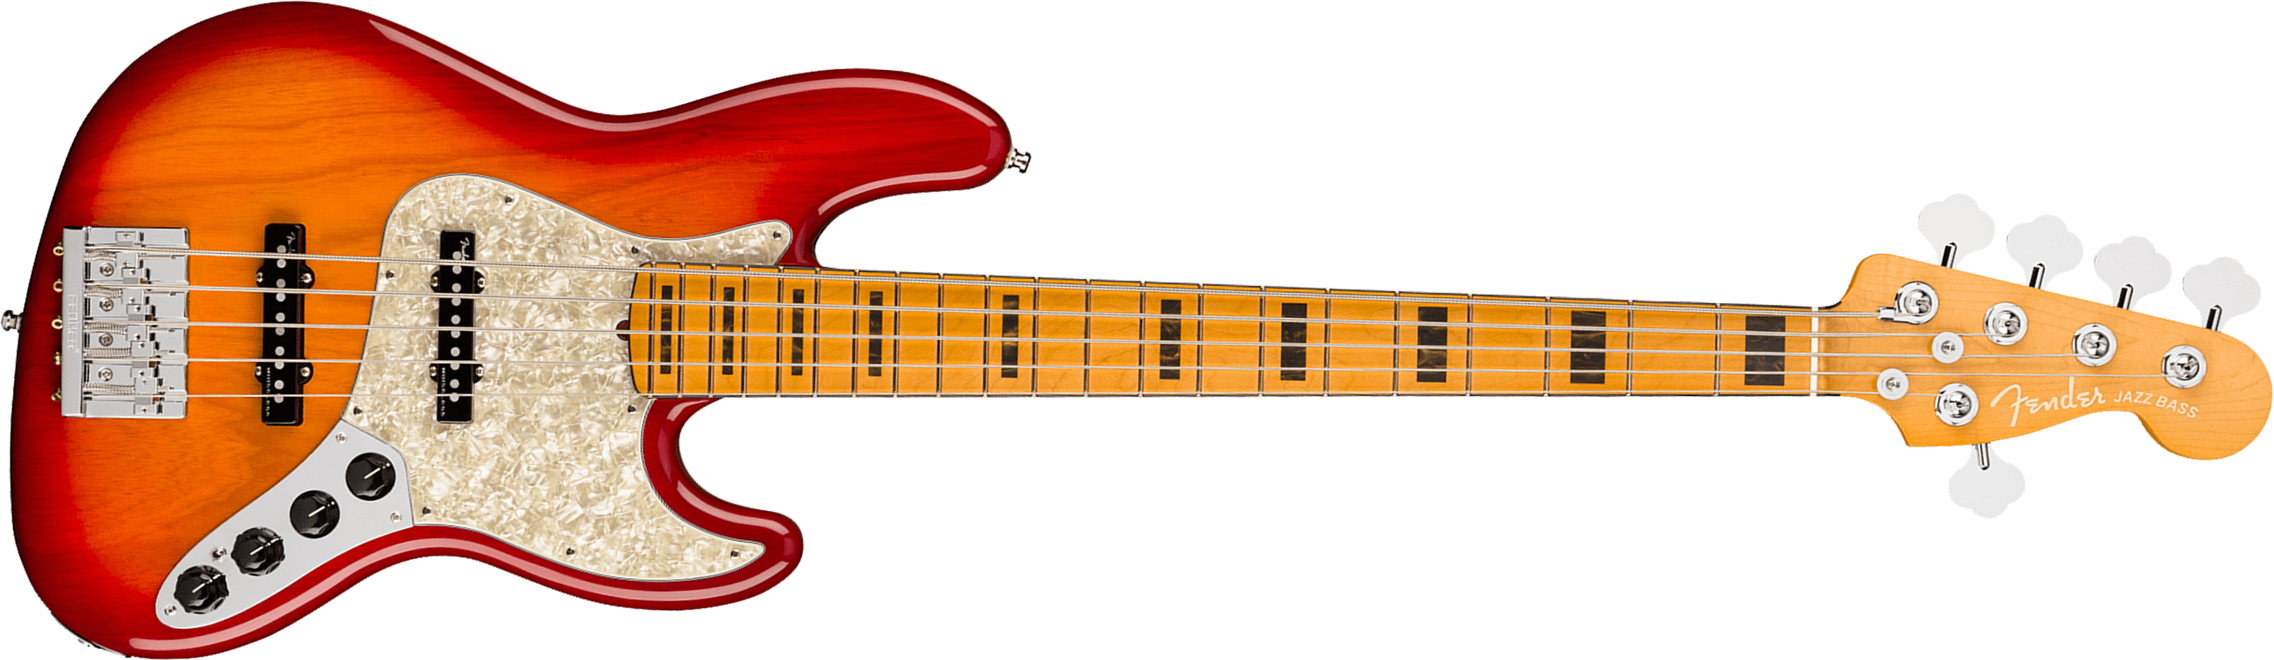 Fender Jazz Bass V American Ultra 2019 Usa 5-cordes Mn - Plasma Red Burst - Solid body electric bass - Main picture